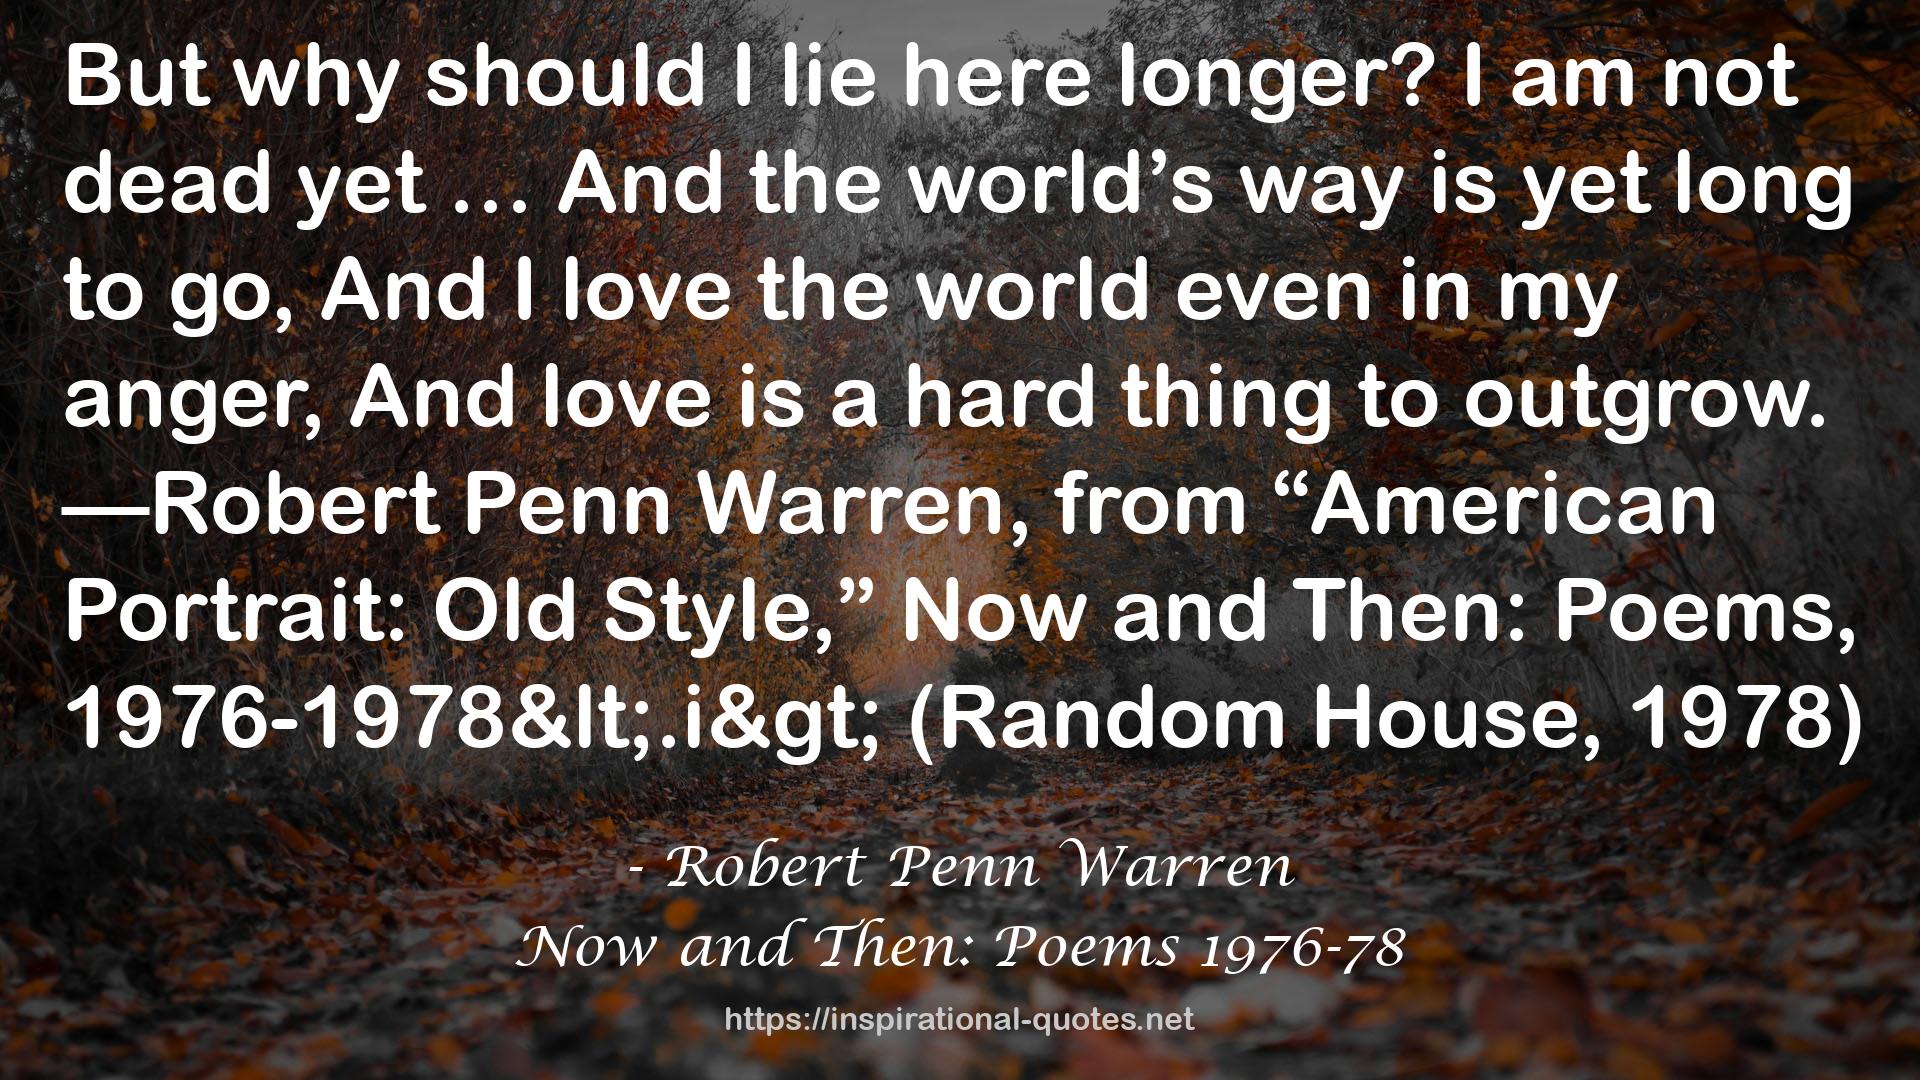 Now and Then: Poems 1976-78 QUOTES